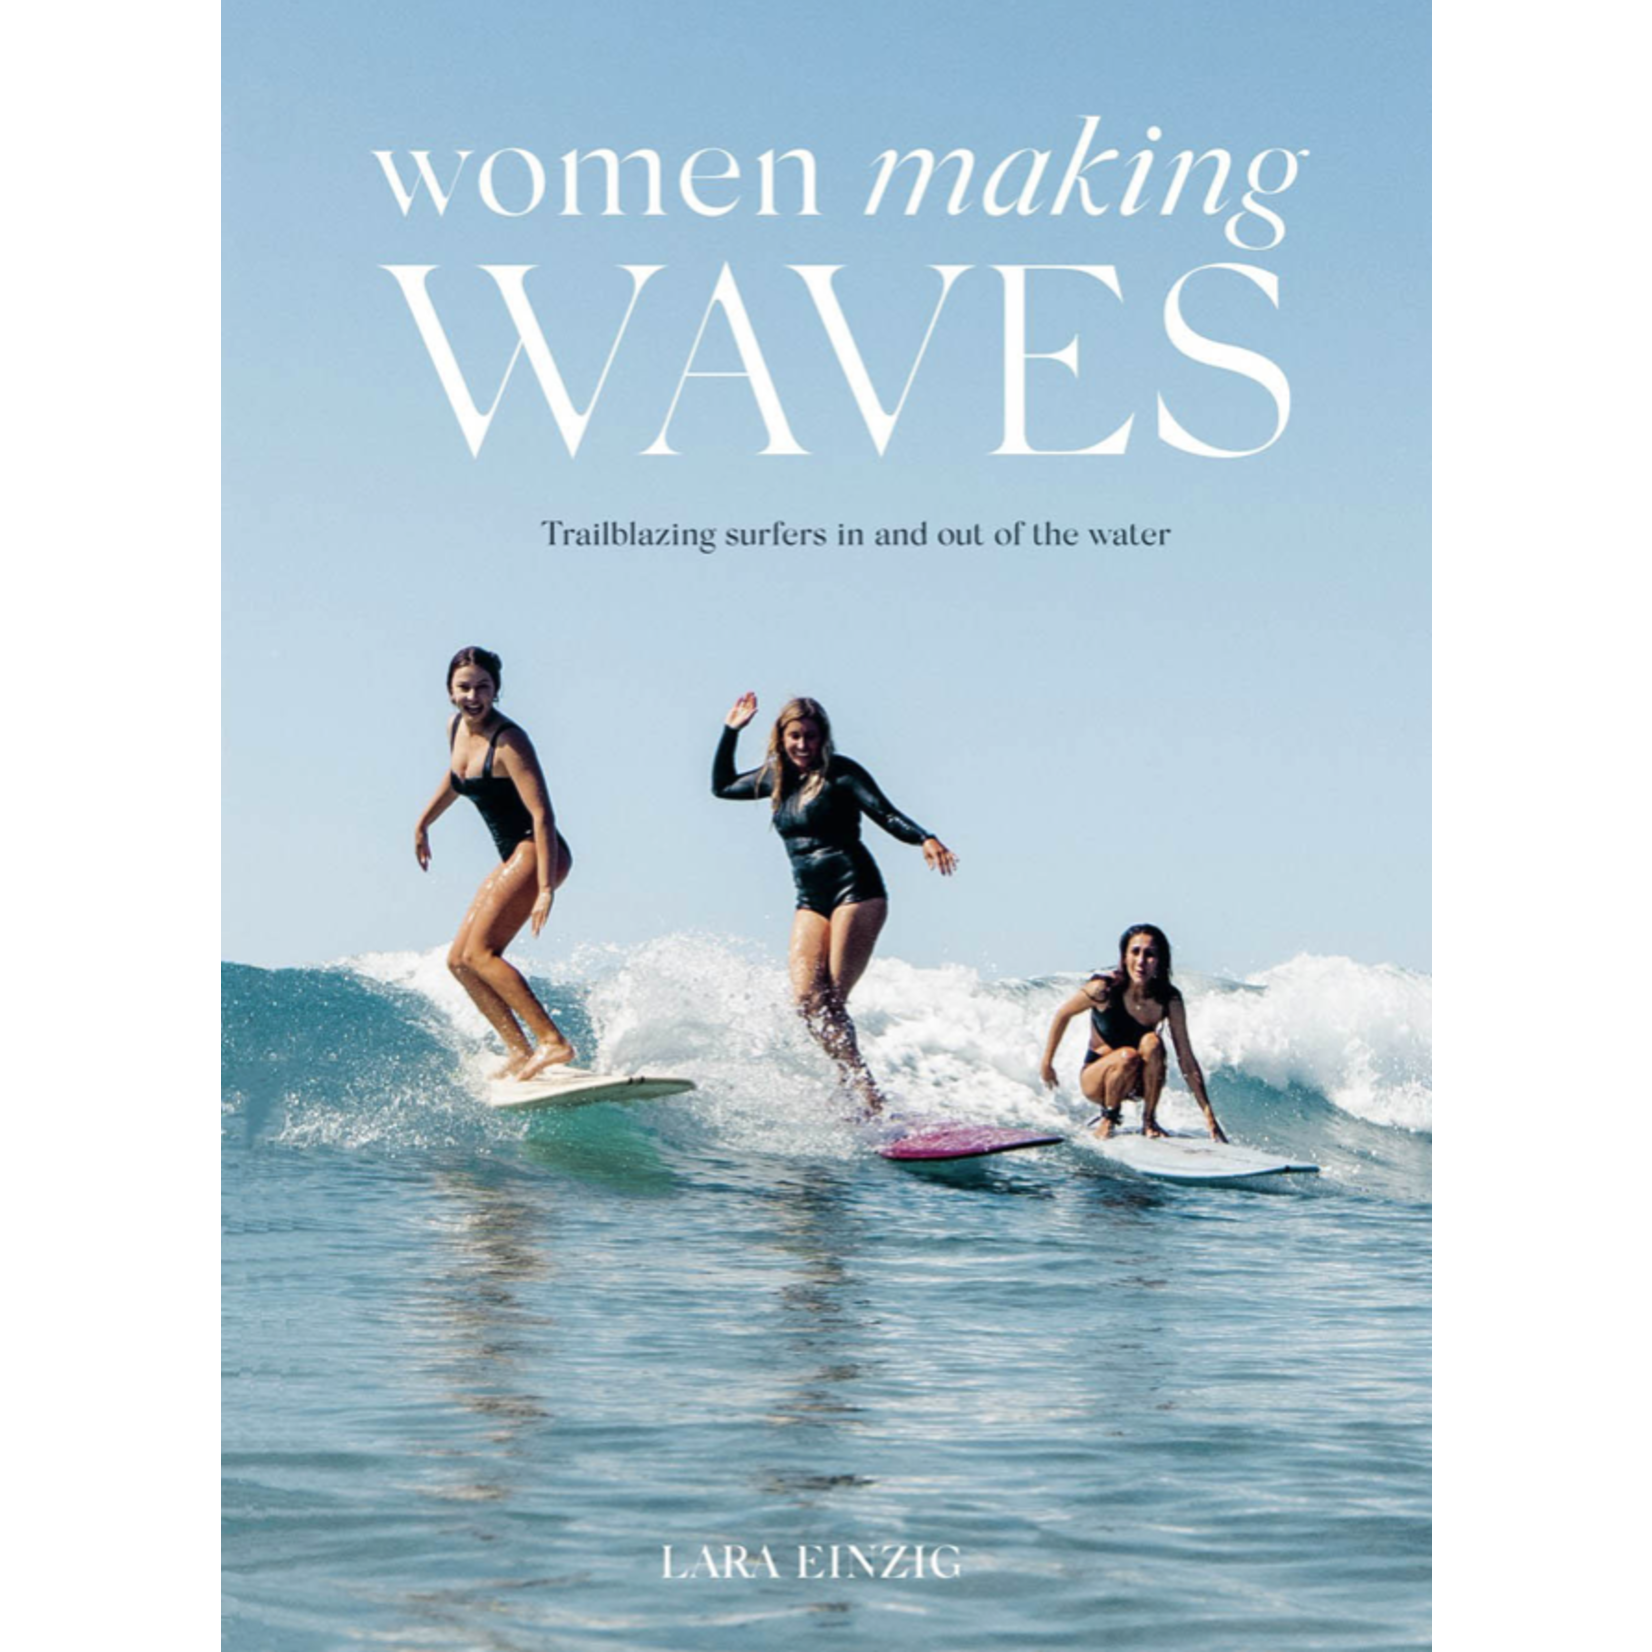 Outside The Box Women Making Waves Hardcover Book